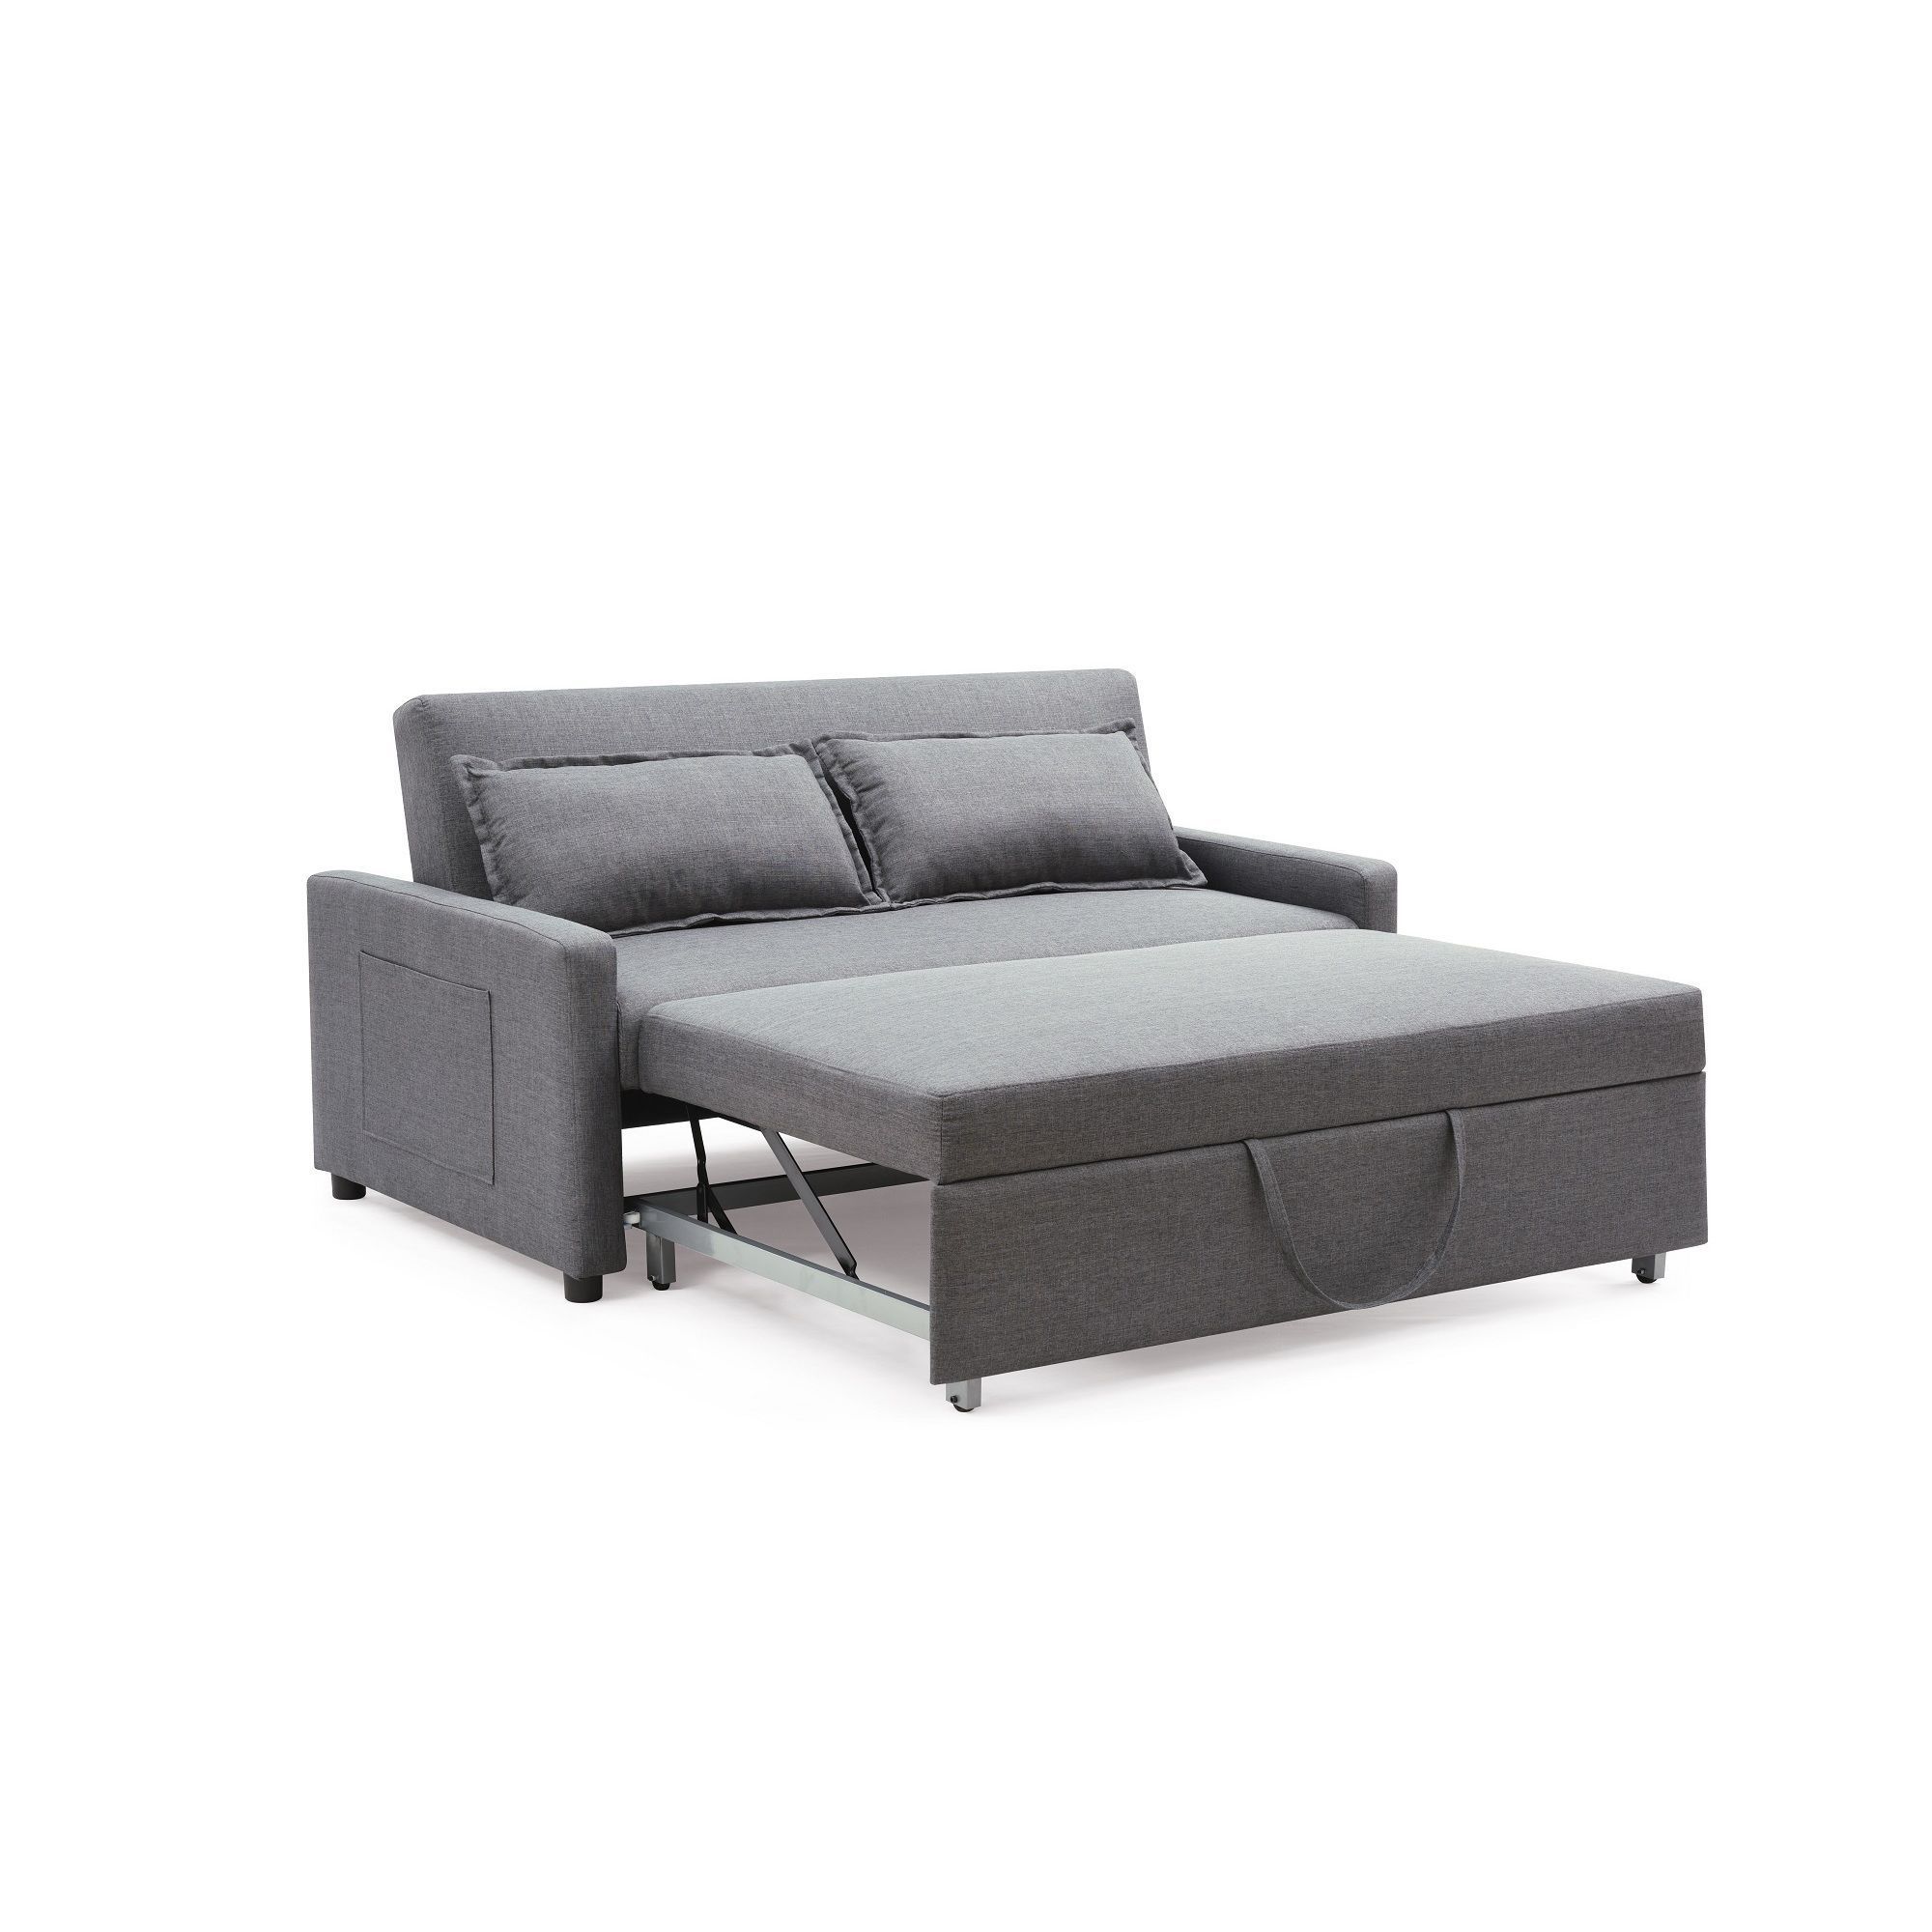 Overstock: Online Shopping – Bedding, Furniture, Electronics Intended For 2 In 1 Gray Pull Out Sofa Beds (View 7 of 20)